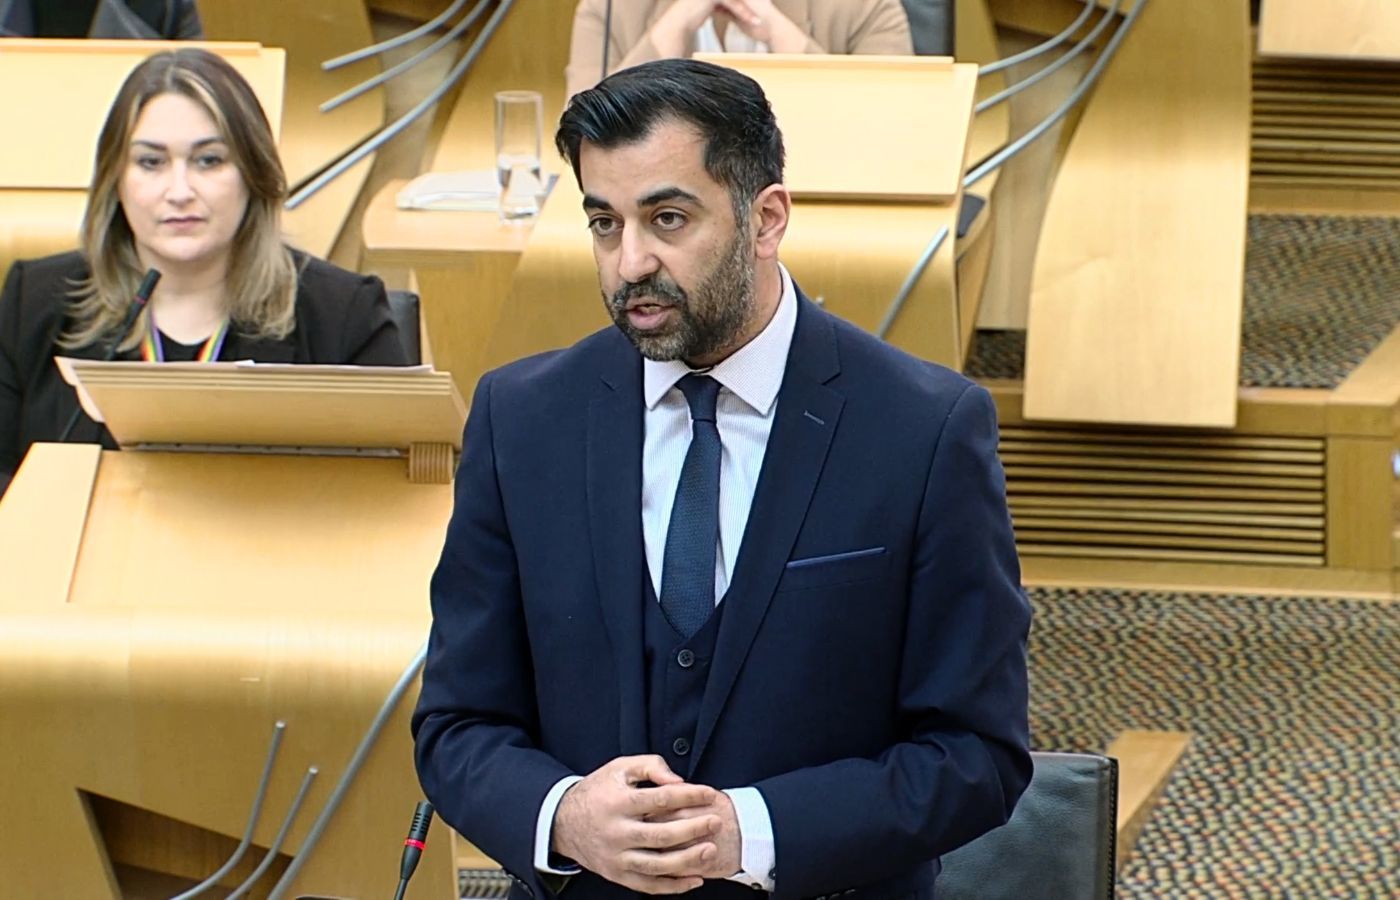 Humza Yousaf's constituency would change under the proposals.